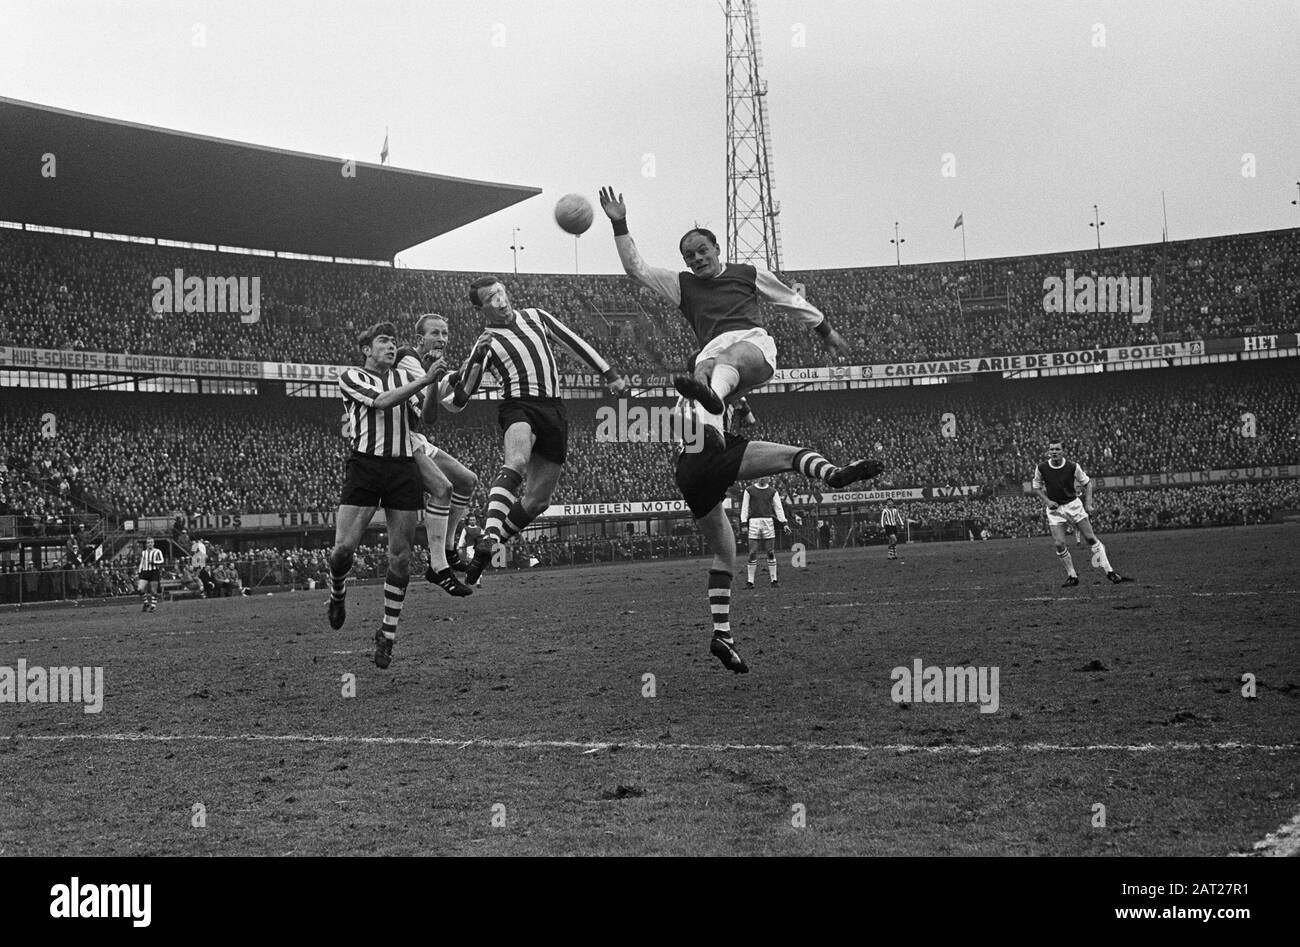 Feyenoord against Sparta 3-1, duel to the ball from l.n.r. Eykenbroek, H.  de Groot, Verhoeven, Gerard 'Pummie' Bergholtz and Ter Horst (on the back)  Date: March 7, 1965 Keywords: duels, sport, football